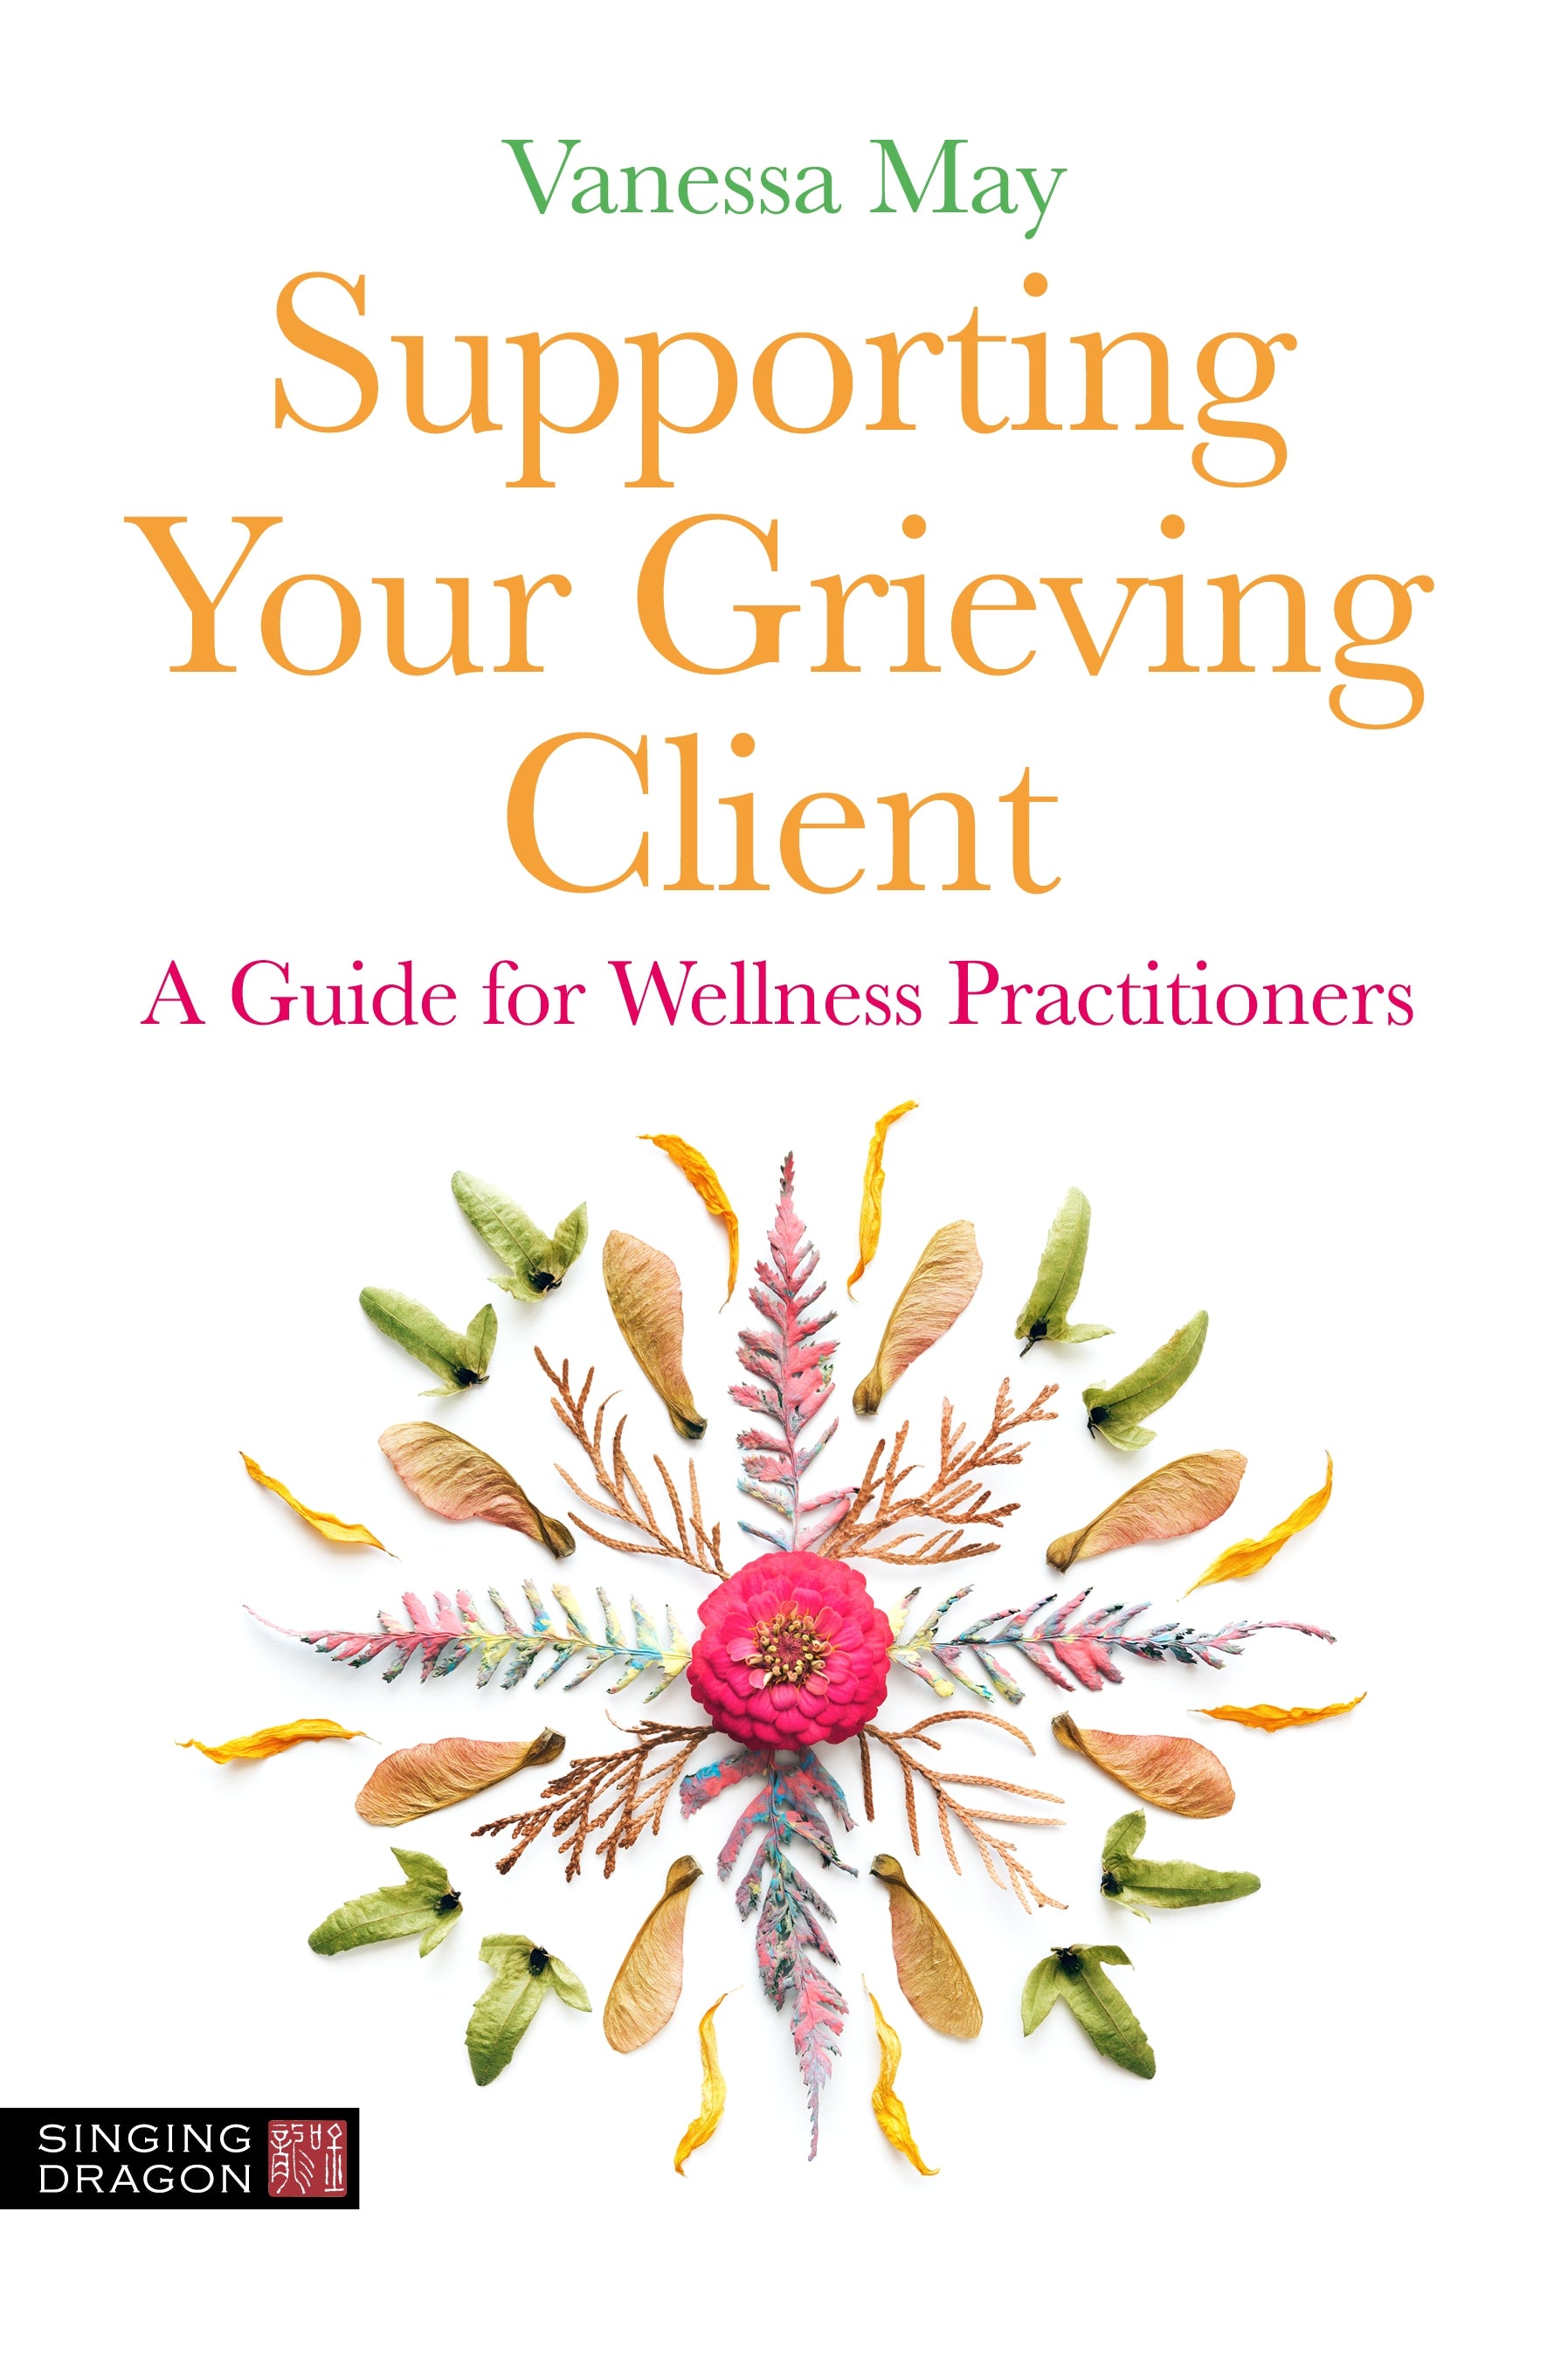 Supporting Your Grieving Client by Vanessa May